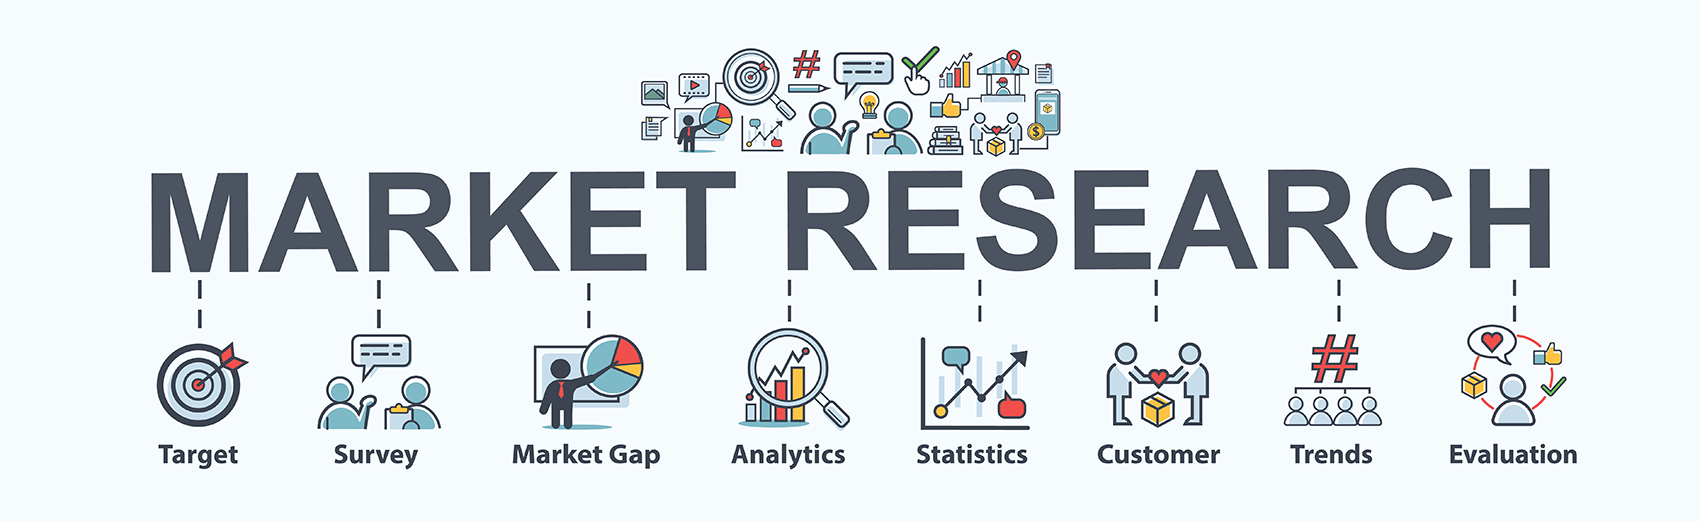 Market research which includes social media marketing, target, survey, market gap, customer, trends, analytics and statistics.